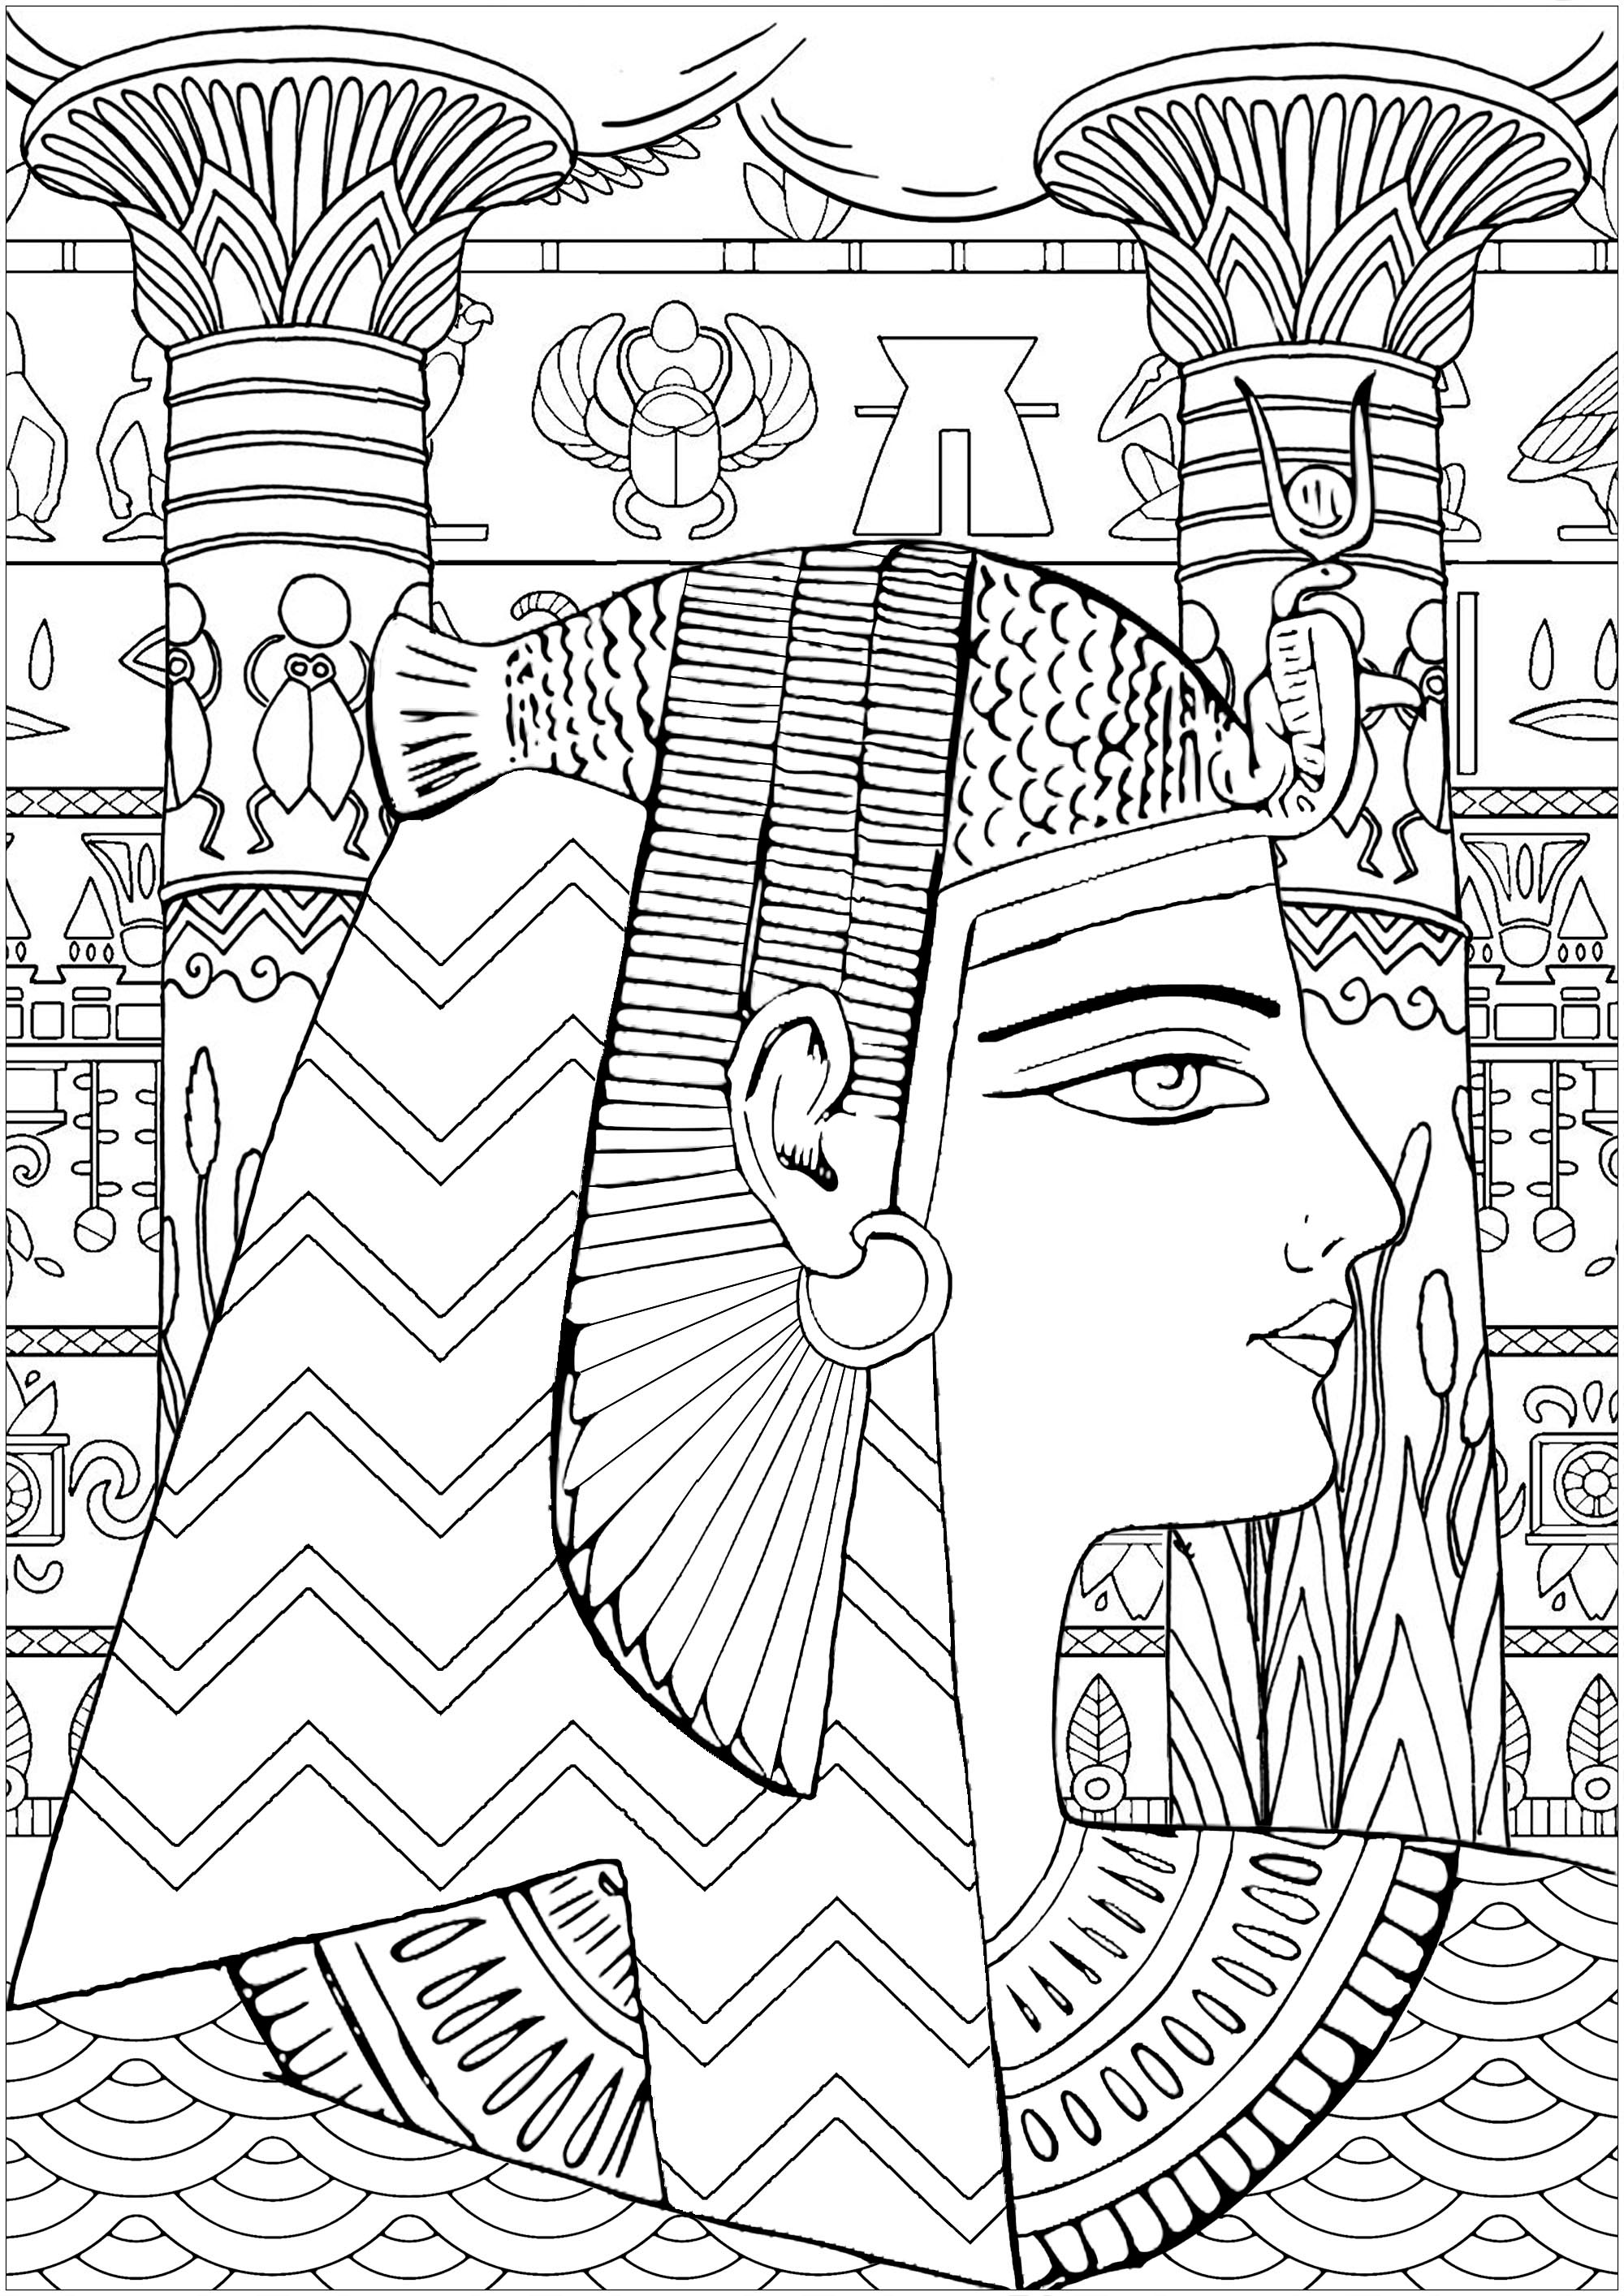 Download Queen of Egypt Difficult version - Egypt Adult Coloring Pages